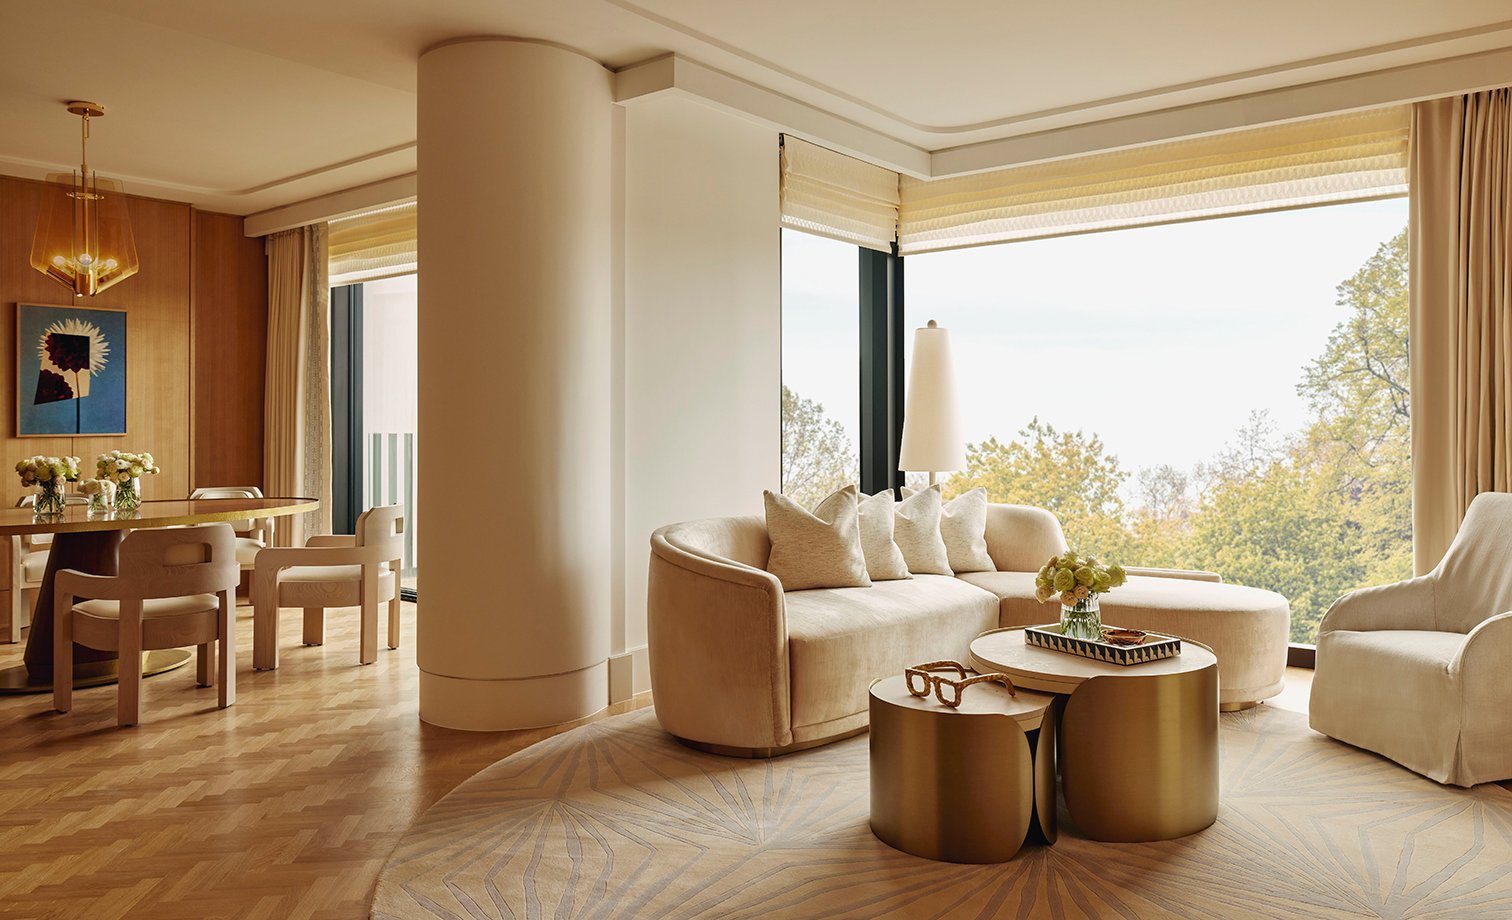 Interior of the Deluxe Balcony Park Suite. Cream sofas are set around a bronze coffee table which is topped with books and flowers. To the left is a dining table with chairs.